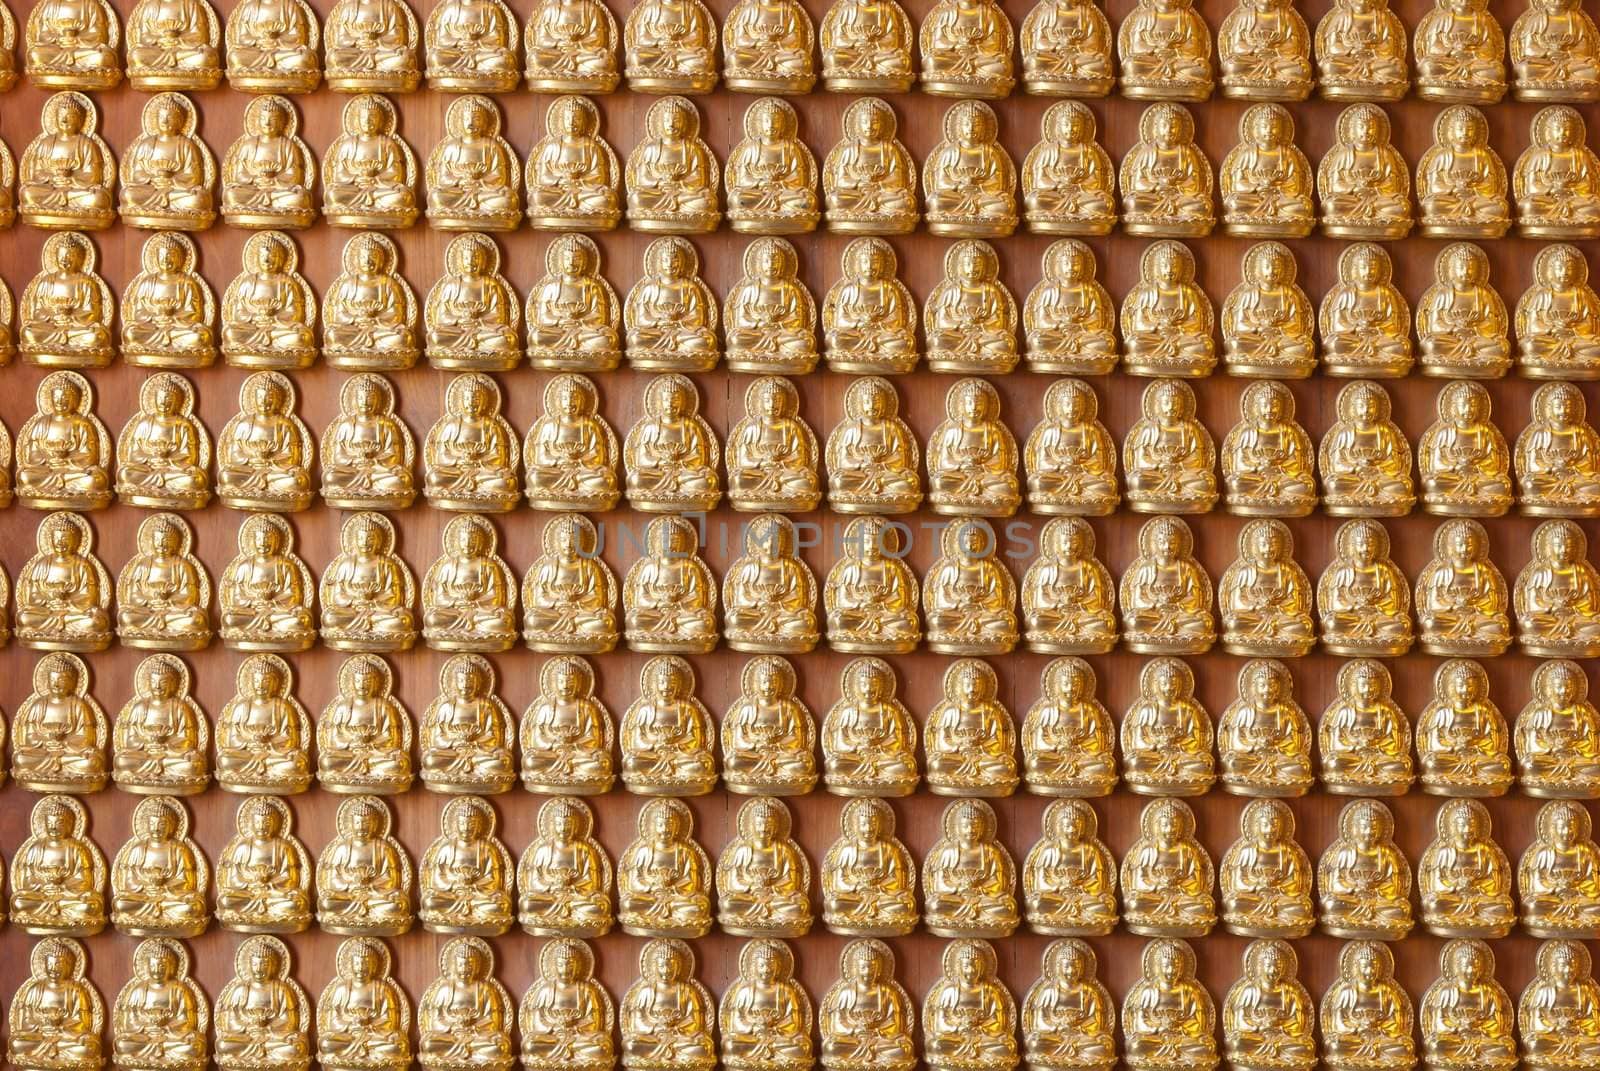 Hundreds of golden Budhha statues background by sasilsolutions